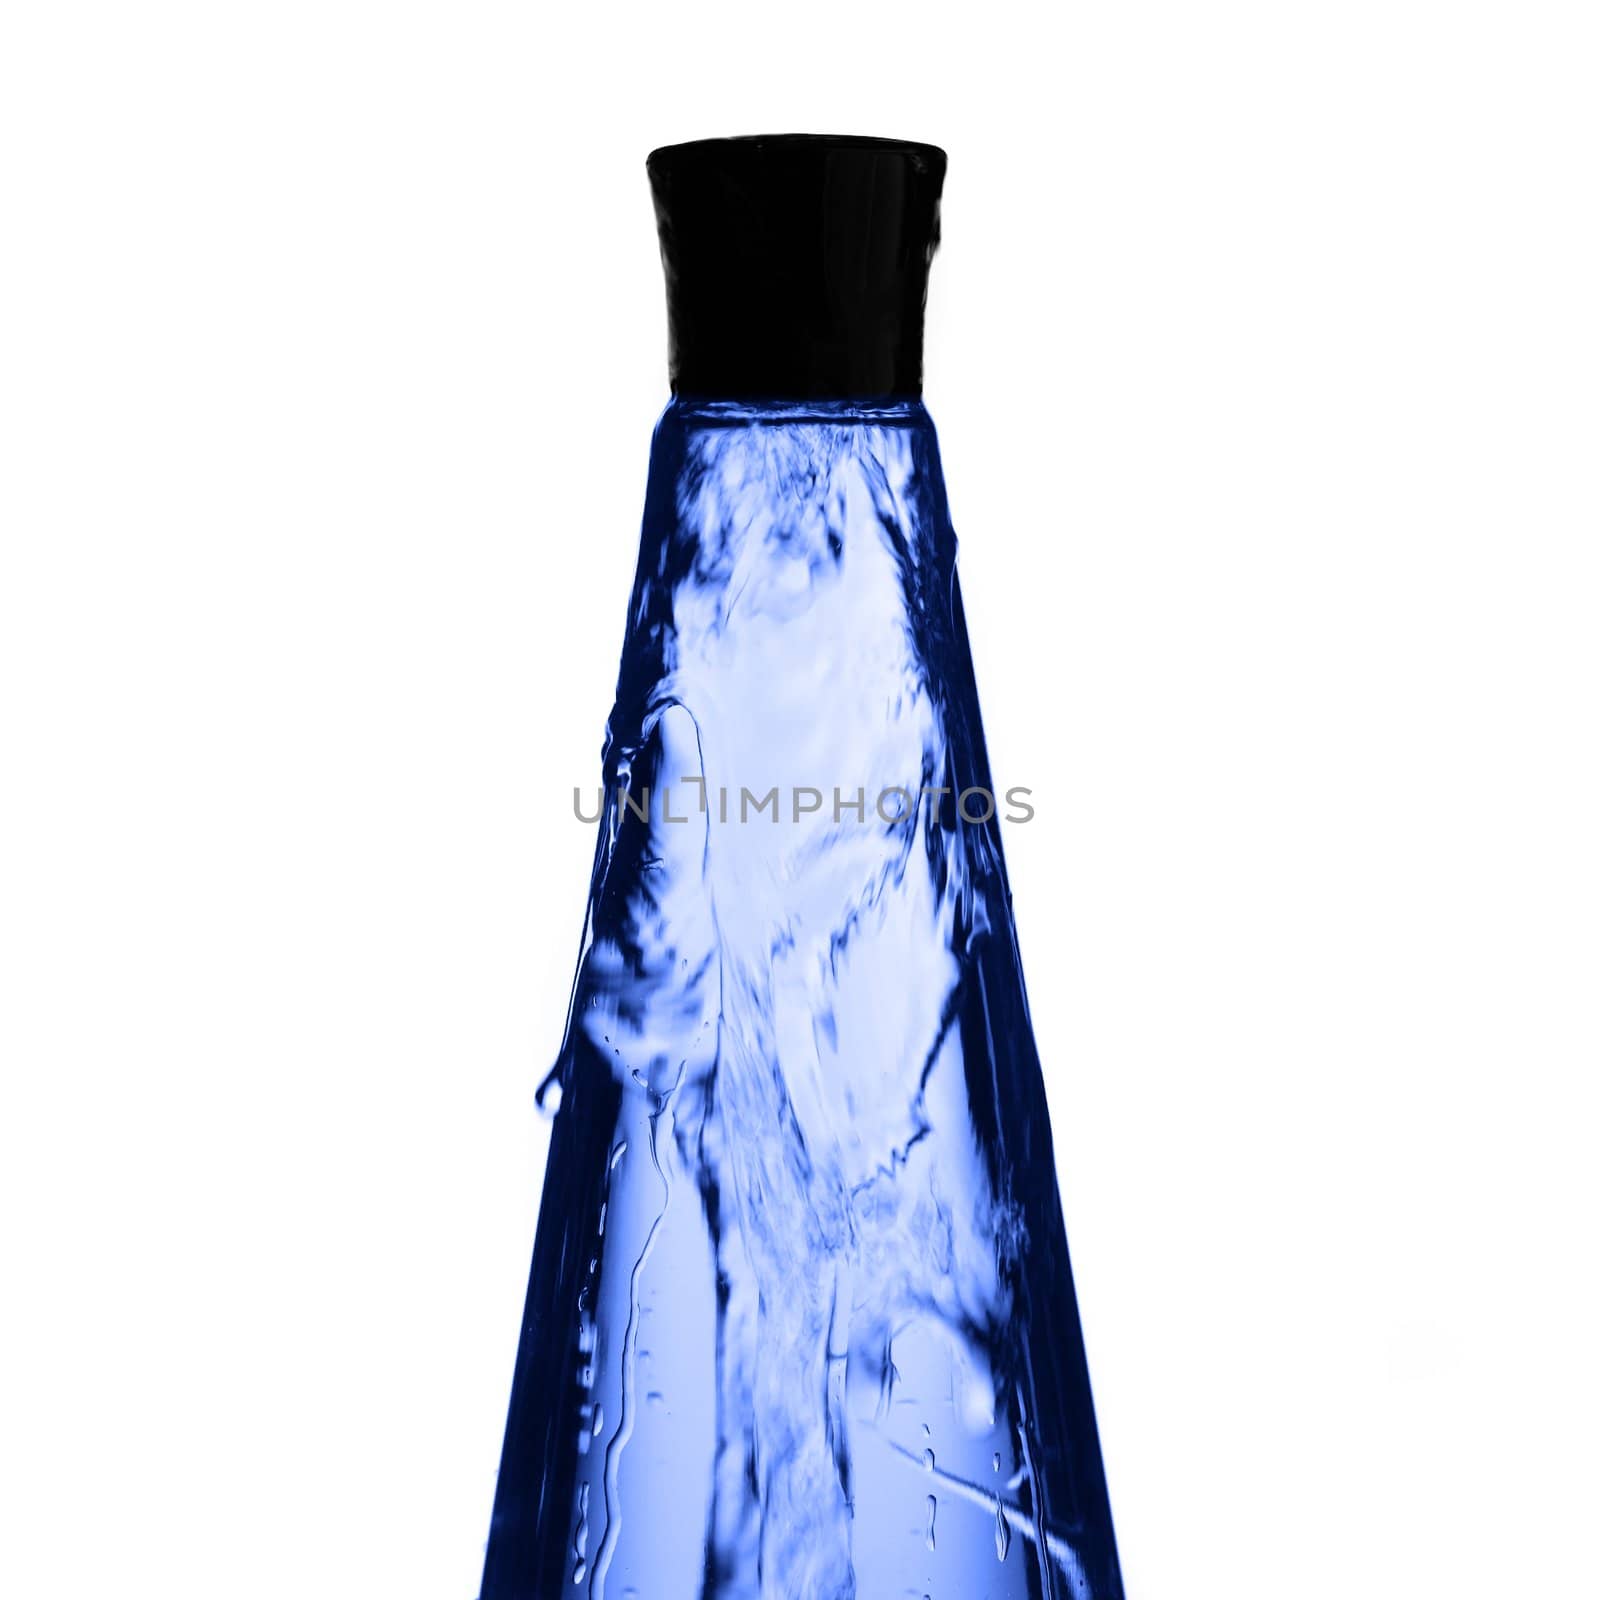 Blue modern looking bottle with water falling down its sides.